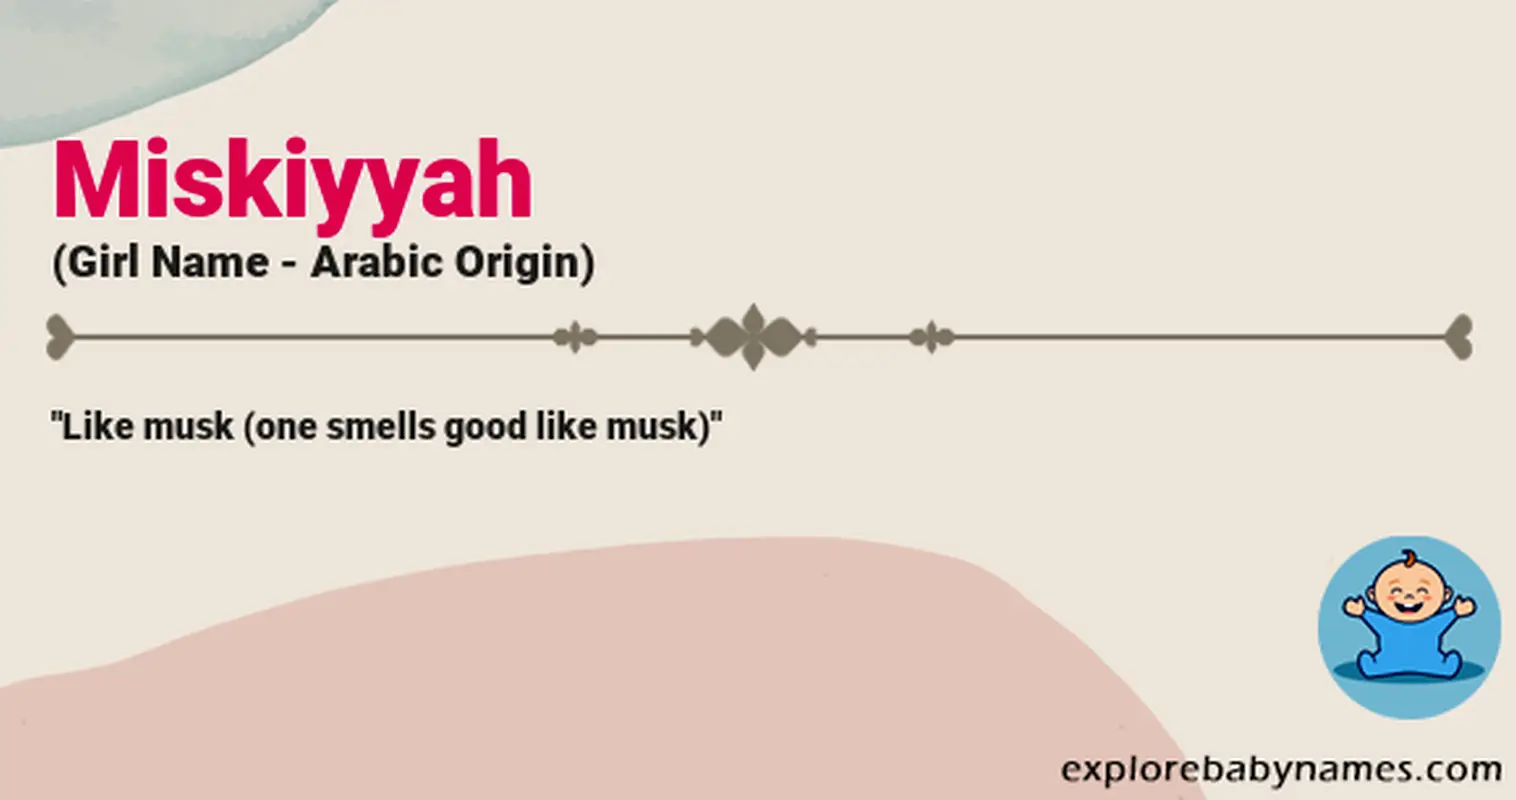 Meaning of Miskiyyah